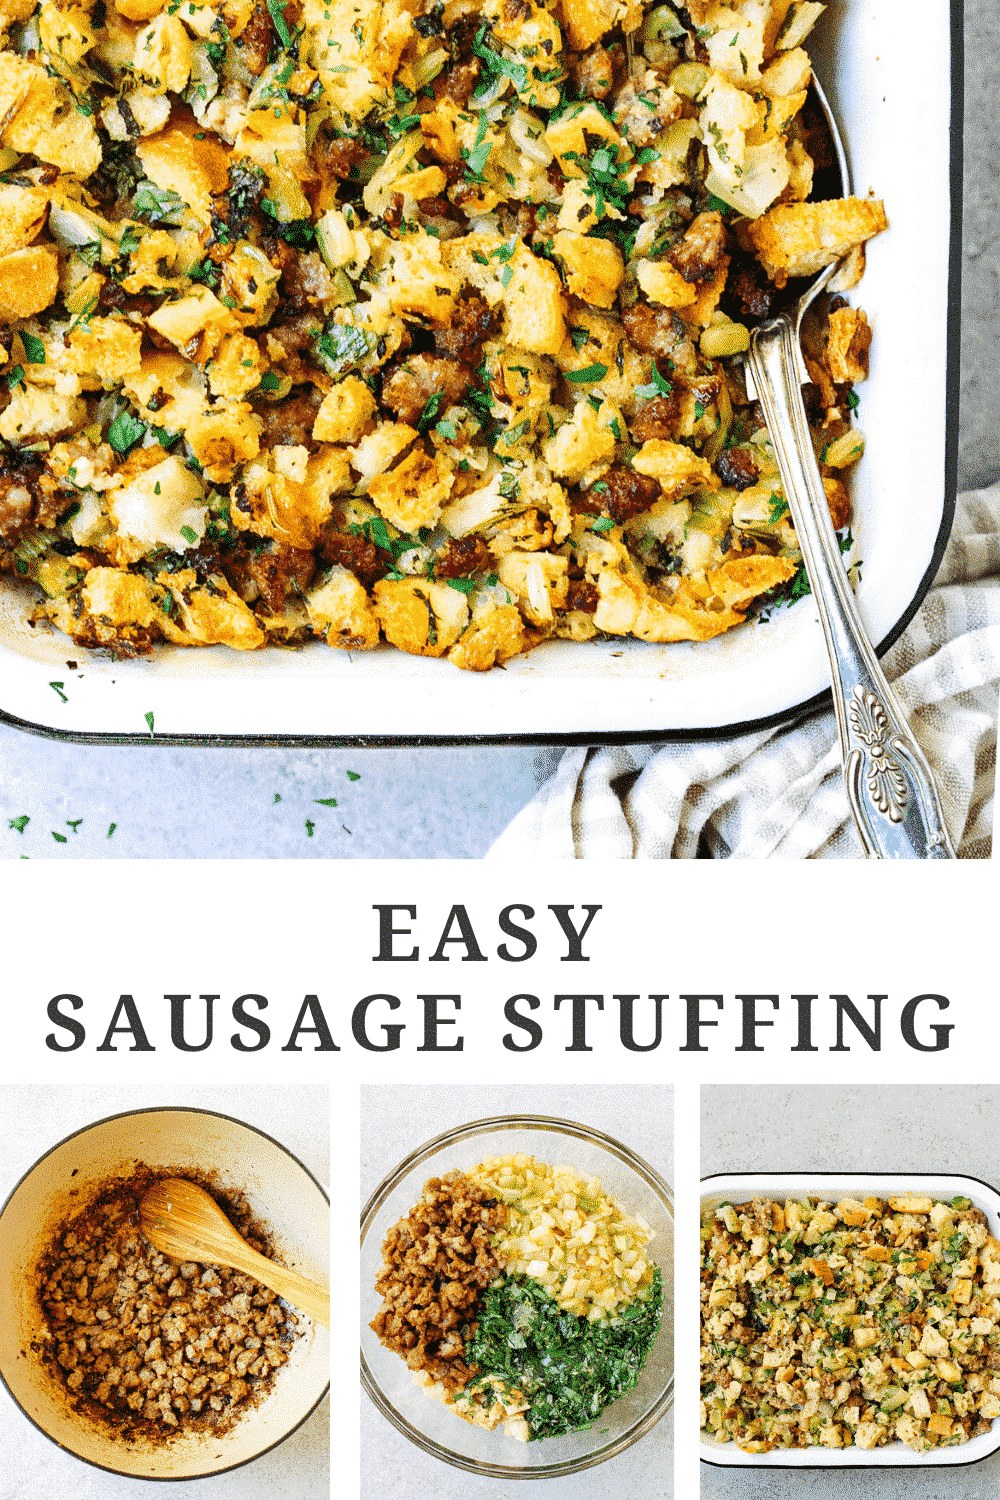 titled photo collage (and shown): Easy Sausage Stuffing